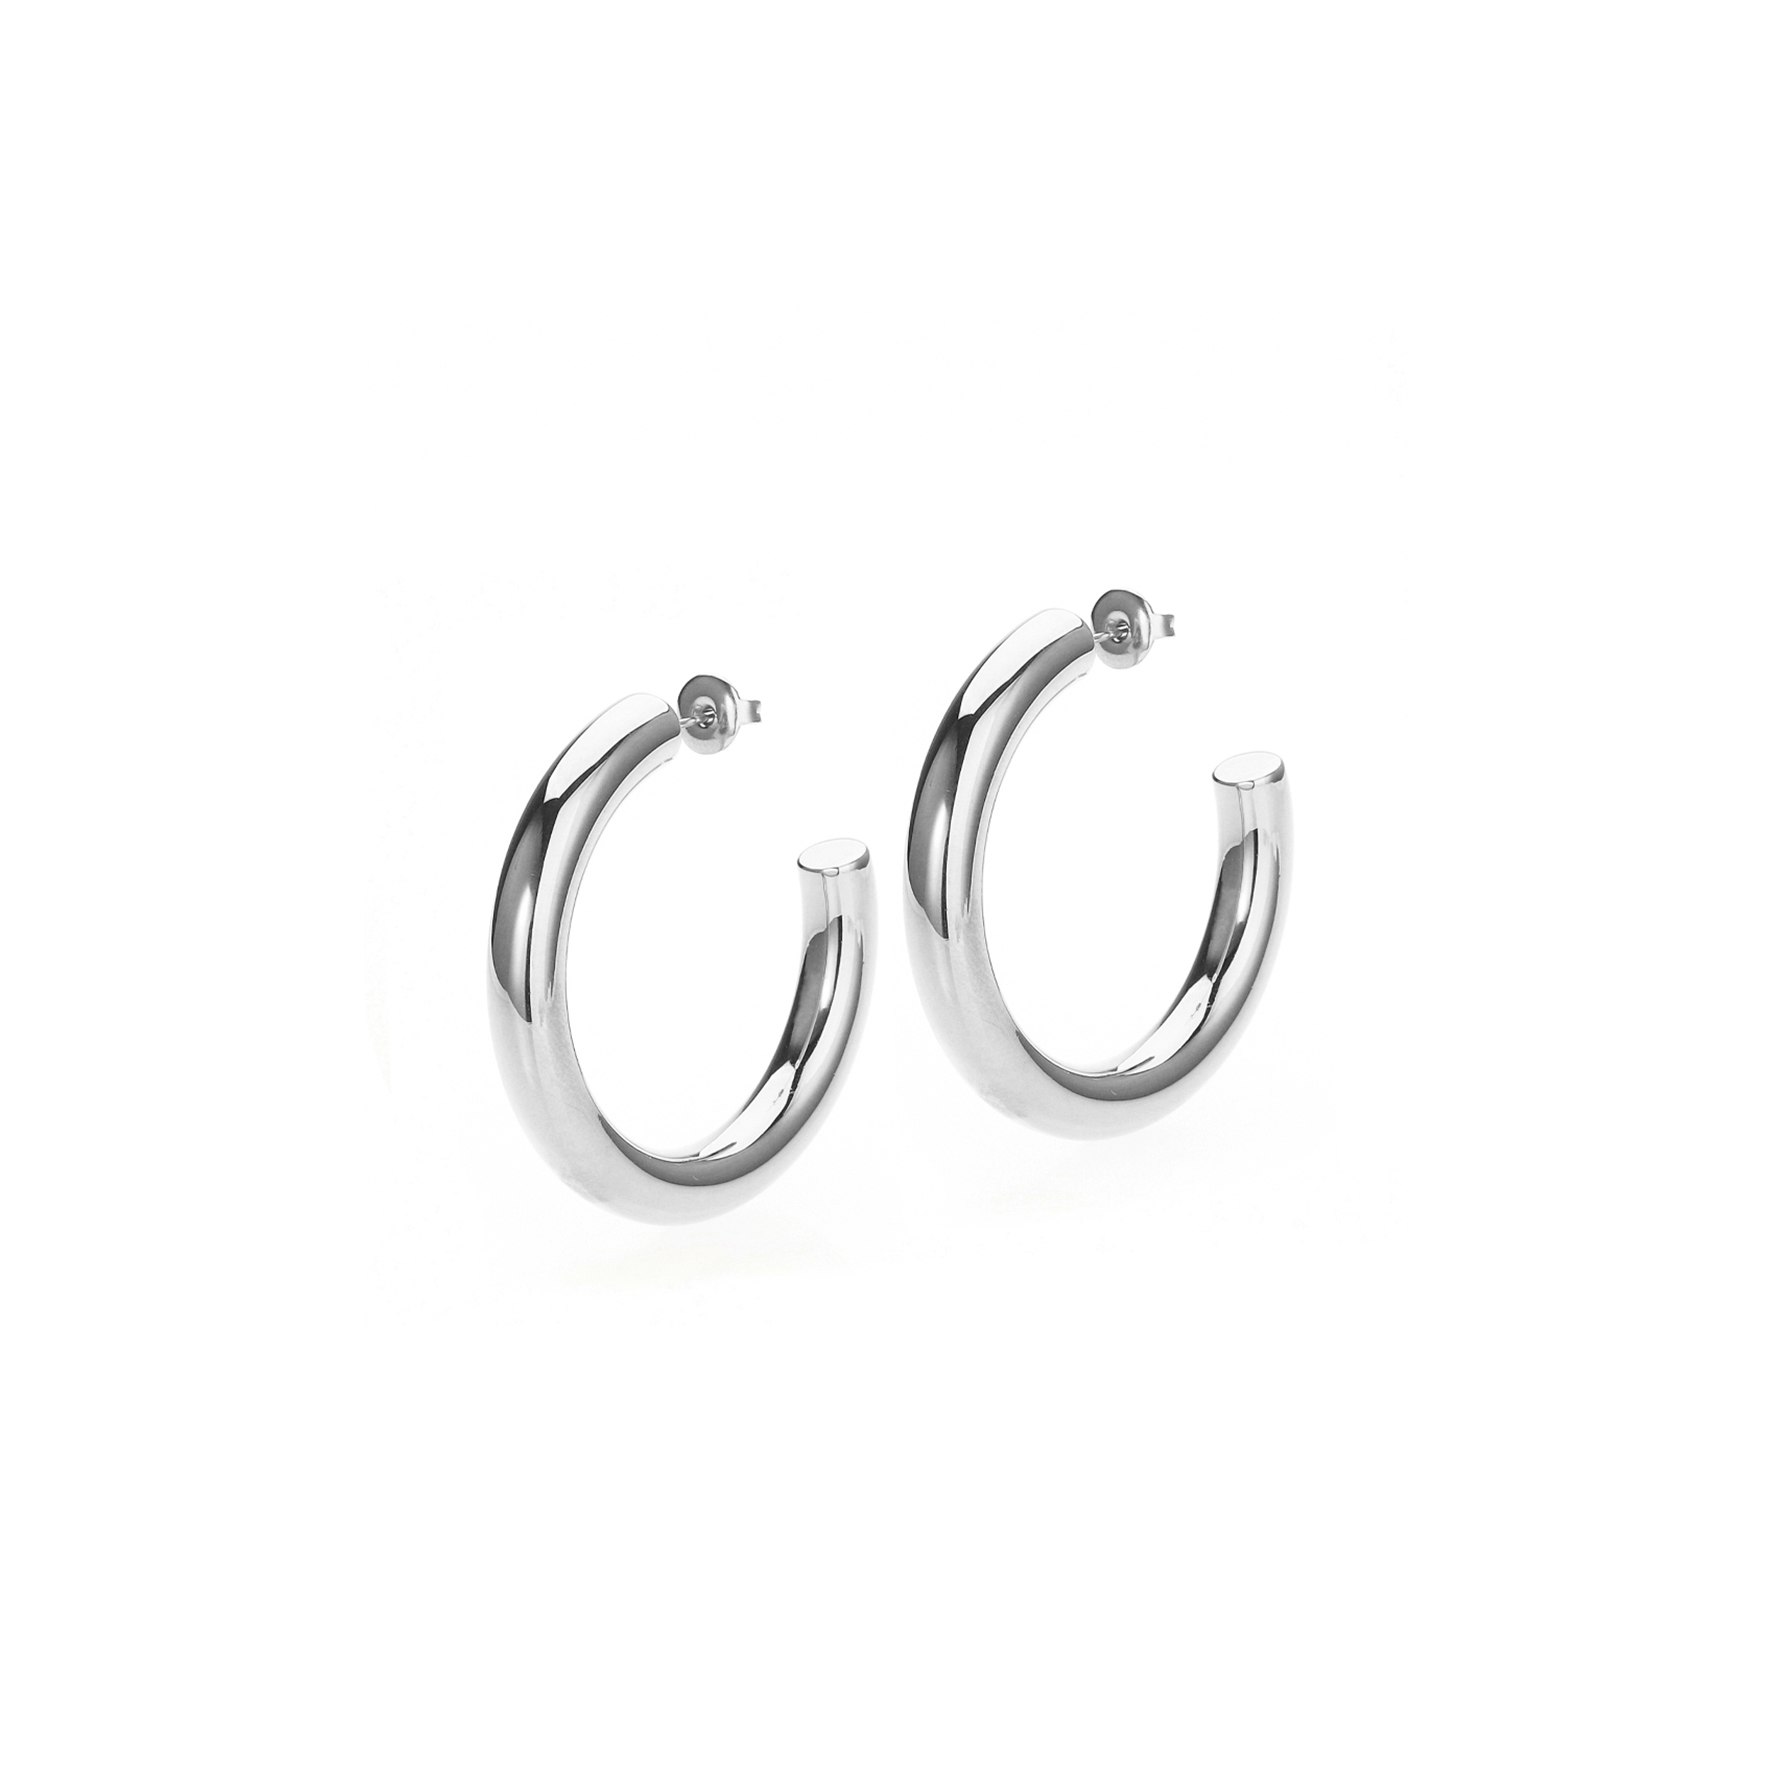 Aura Large Hoops from Sistie 2nd in Stainless steel